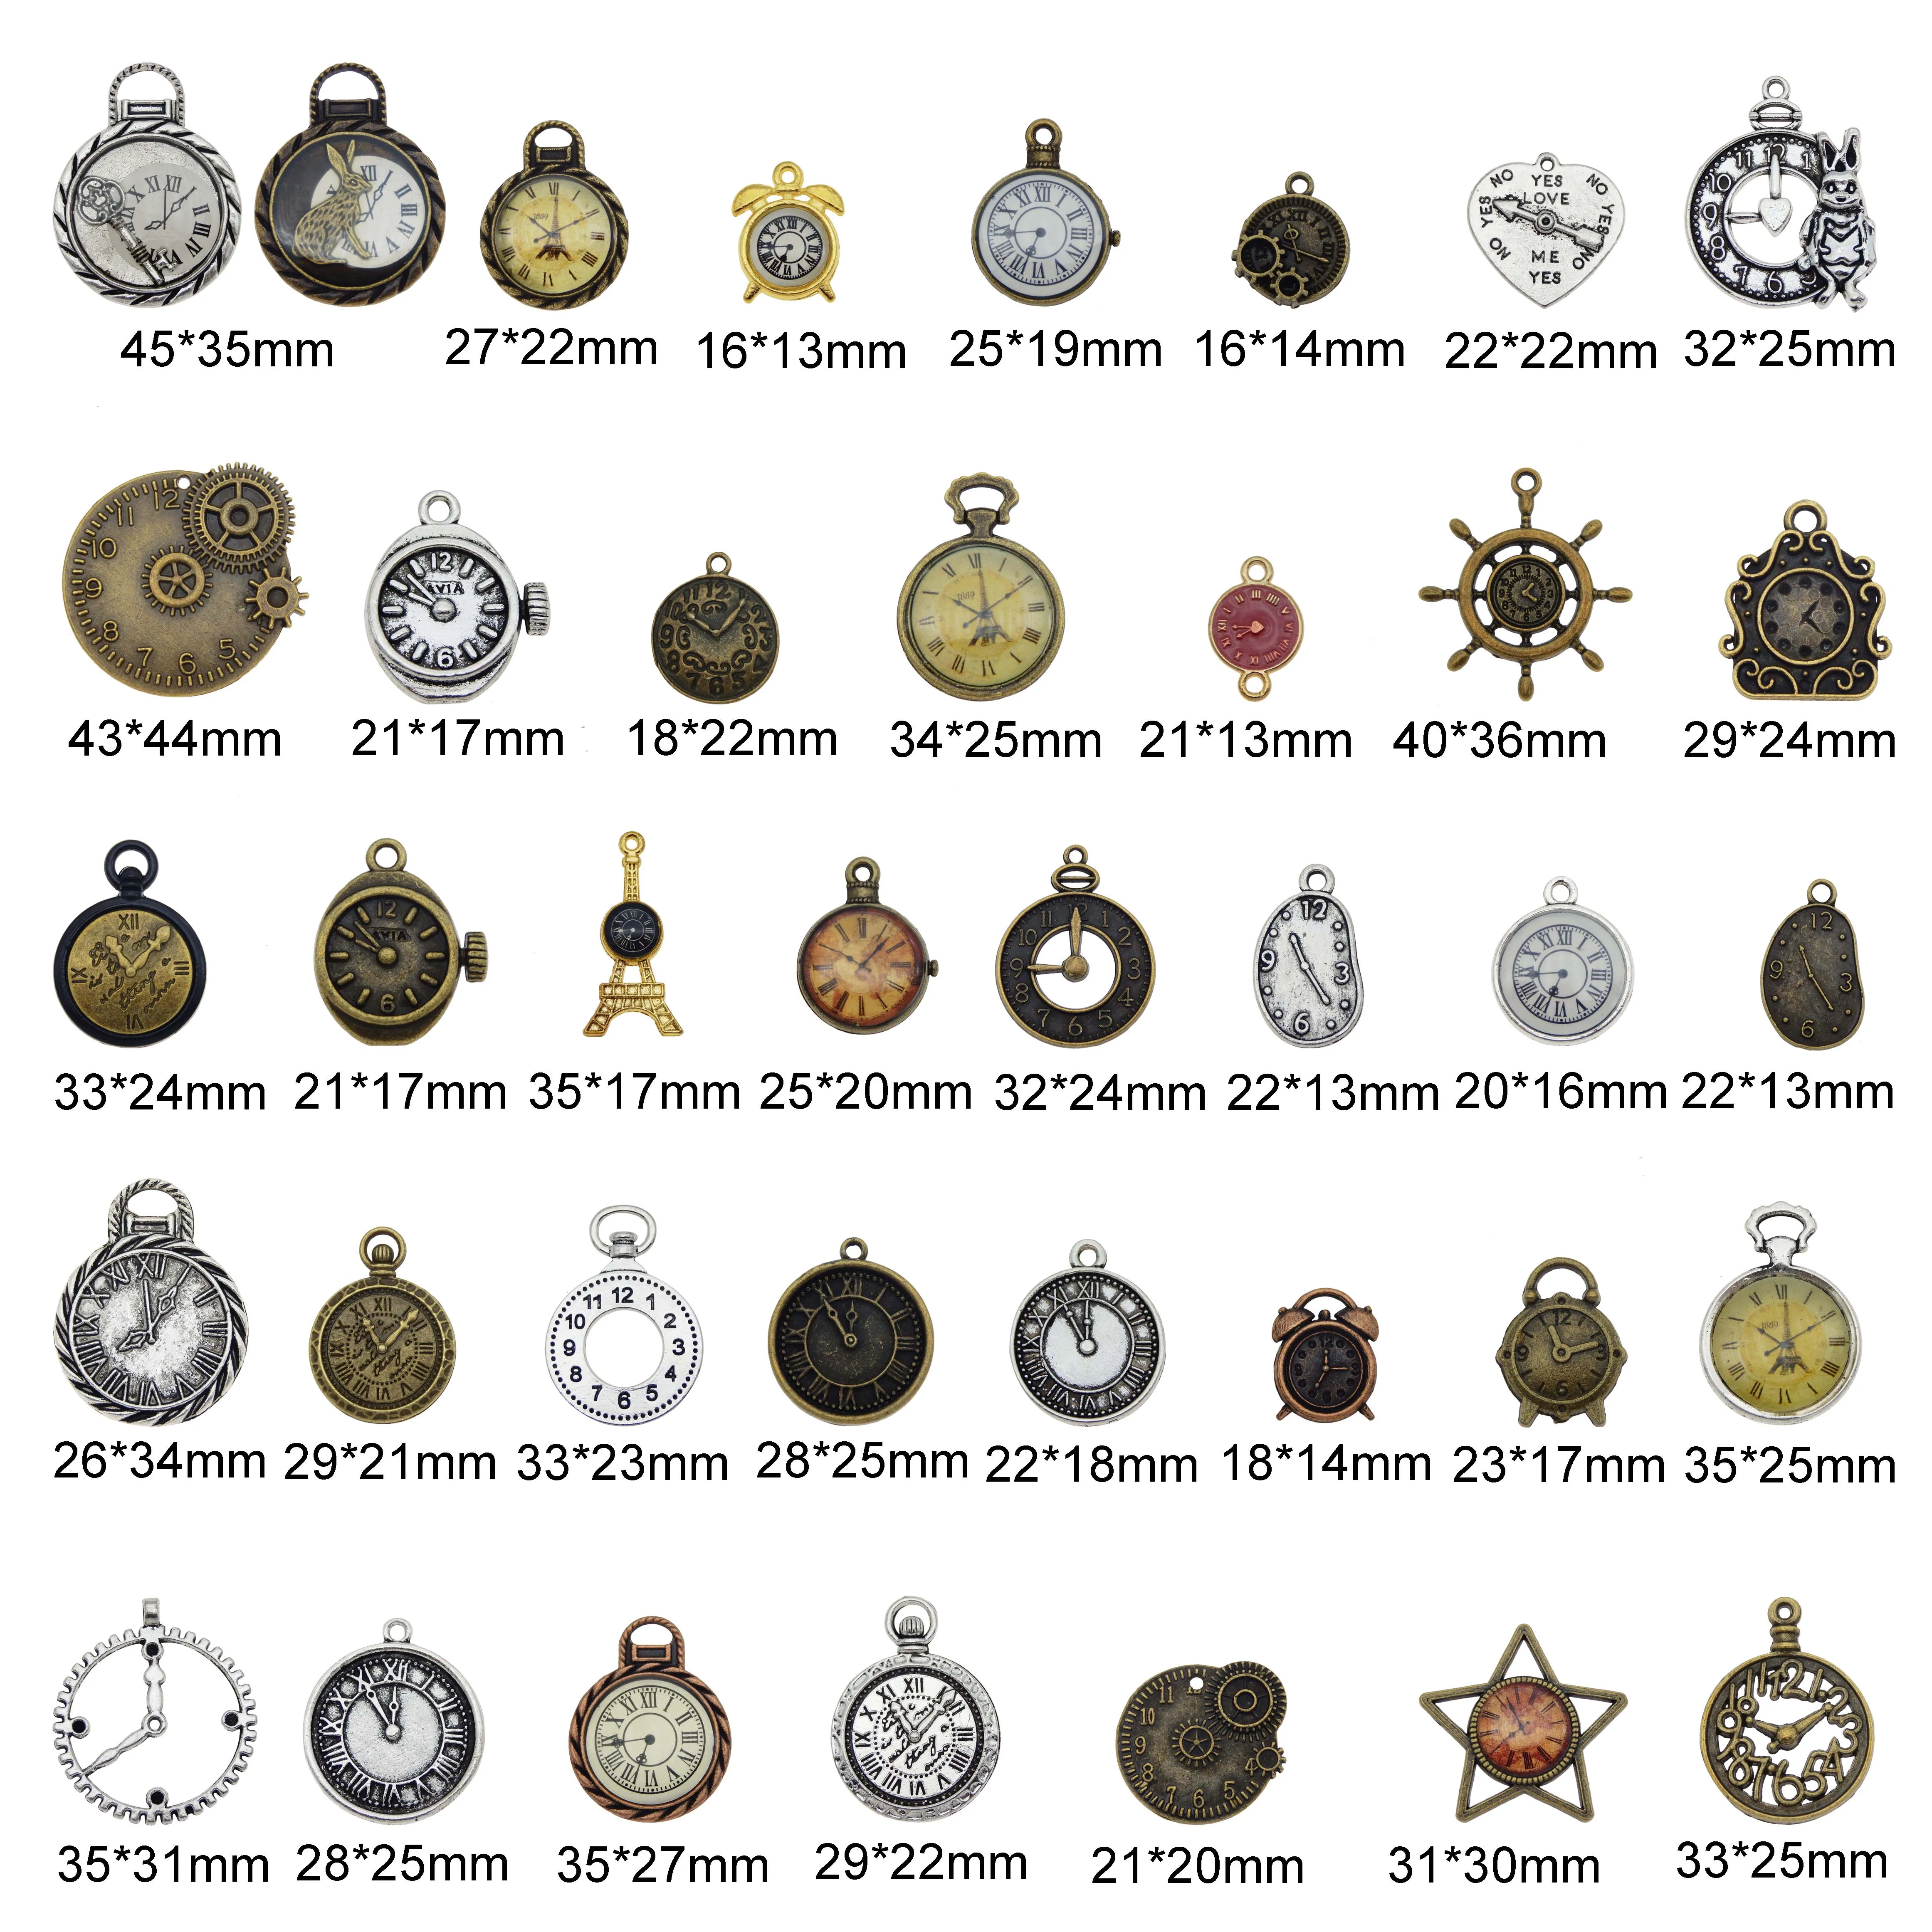 Random Mixed Clock Watch Face Components Charms Alloy Necklace Pendant Finding Jewelry Making Steampunk DIY Accessory306b